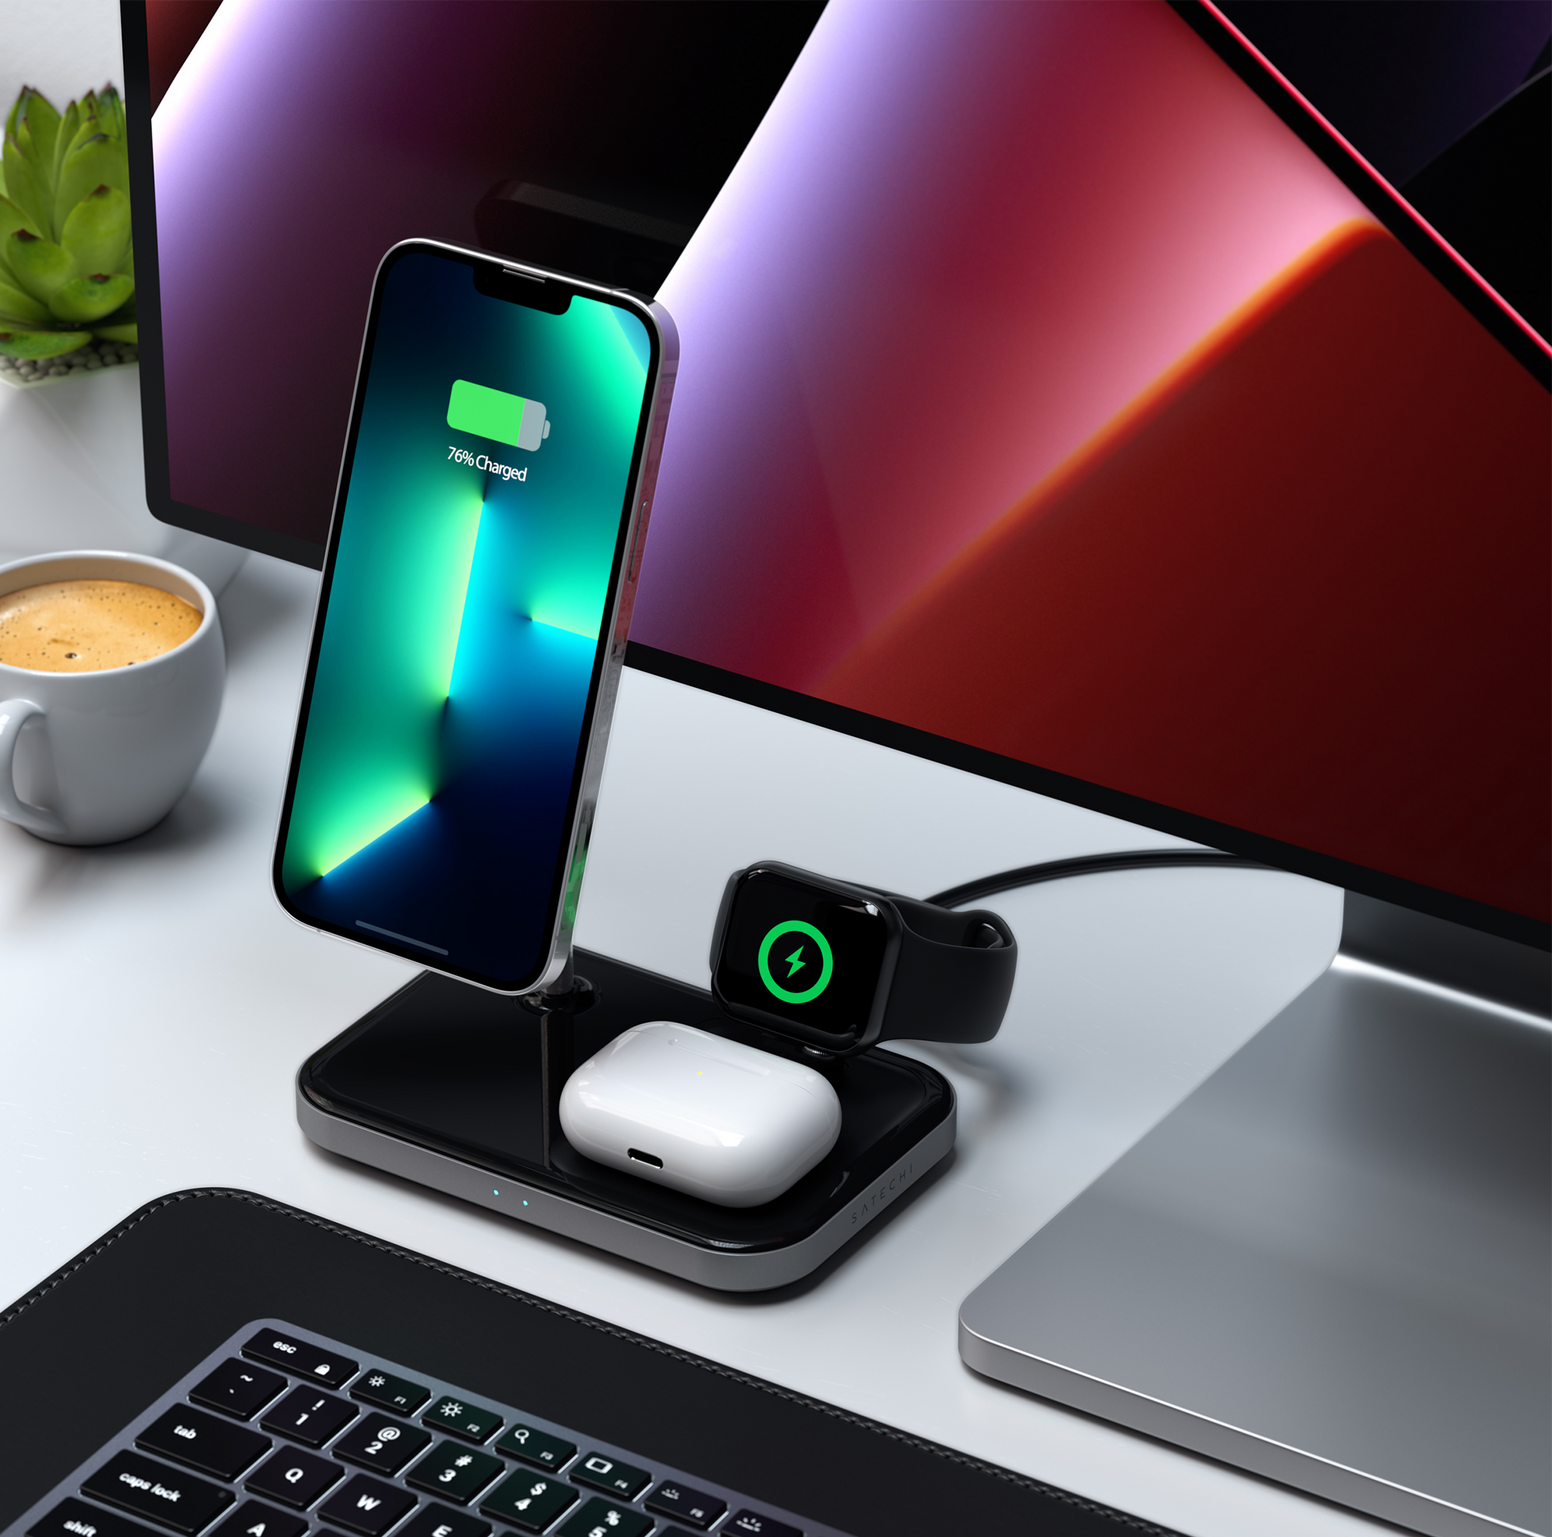 Satechi 3-in-1 Magnetic Wireless Charging Stand - Discontinued